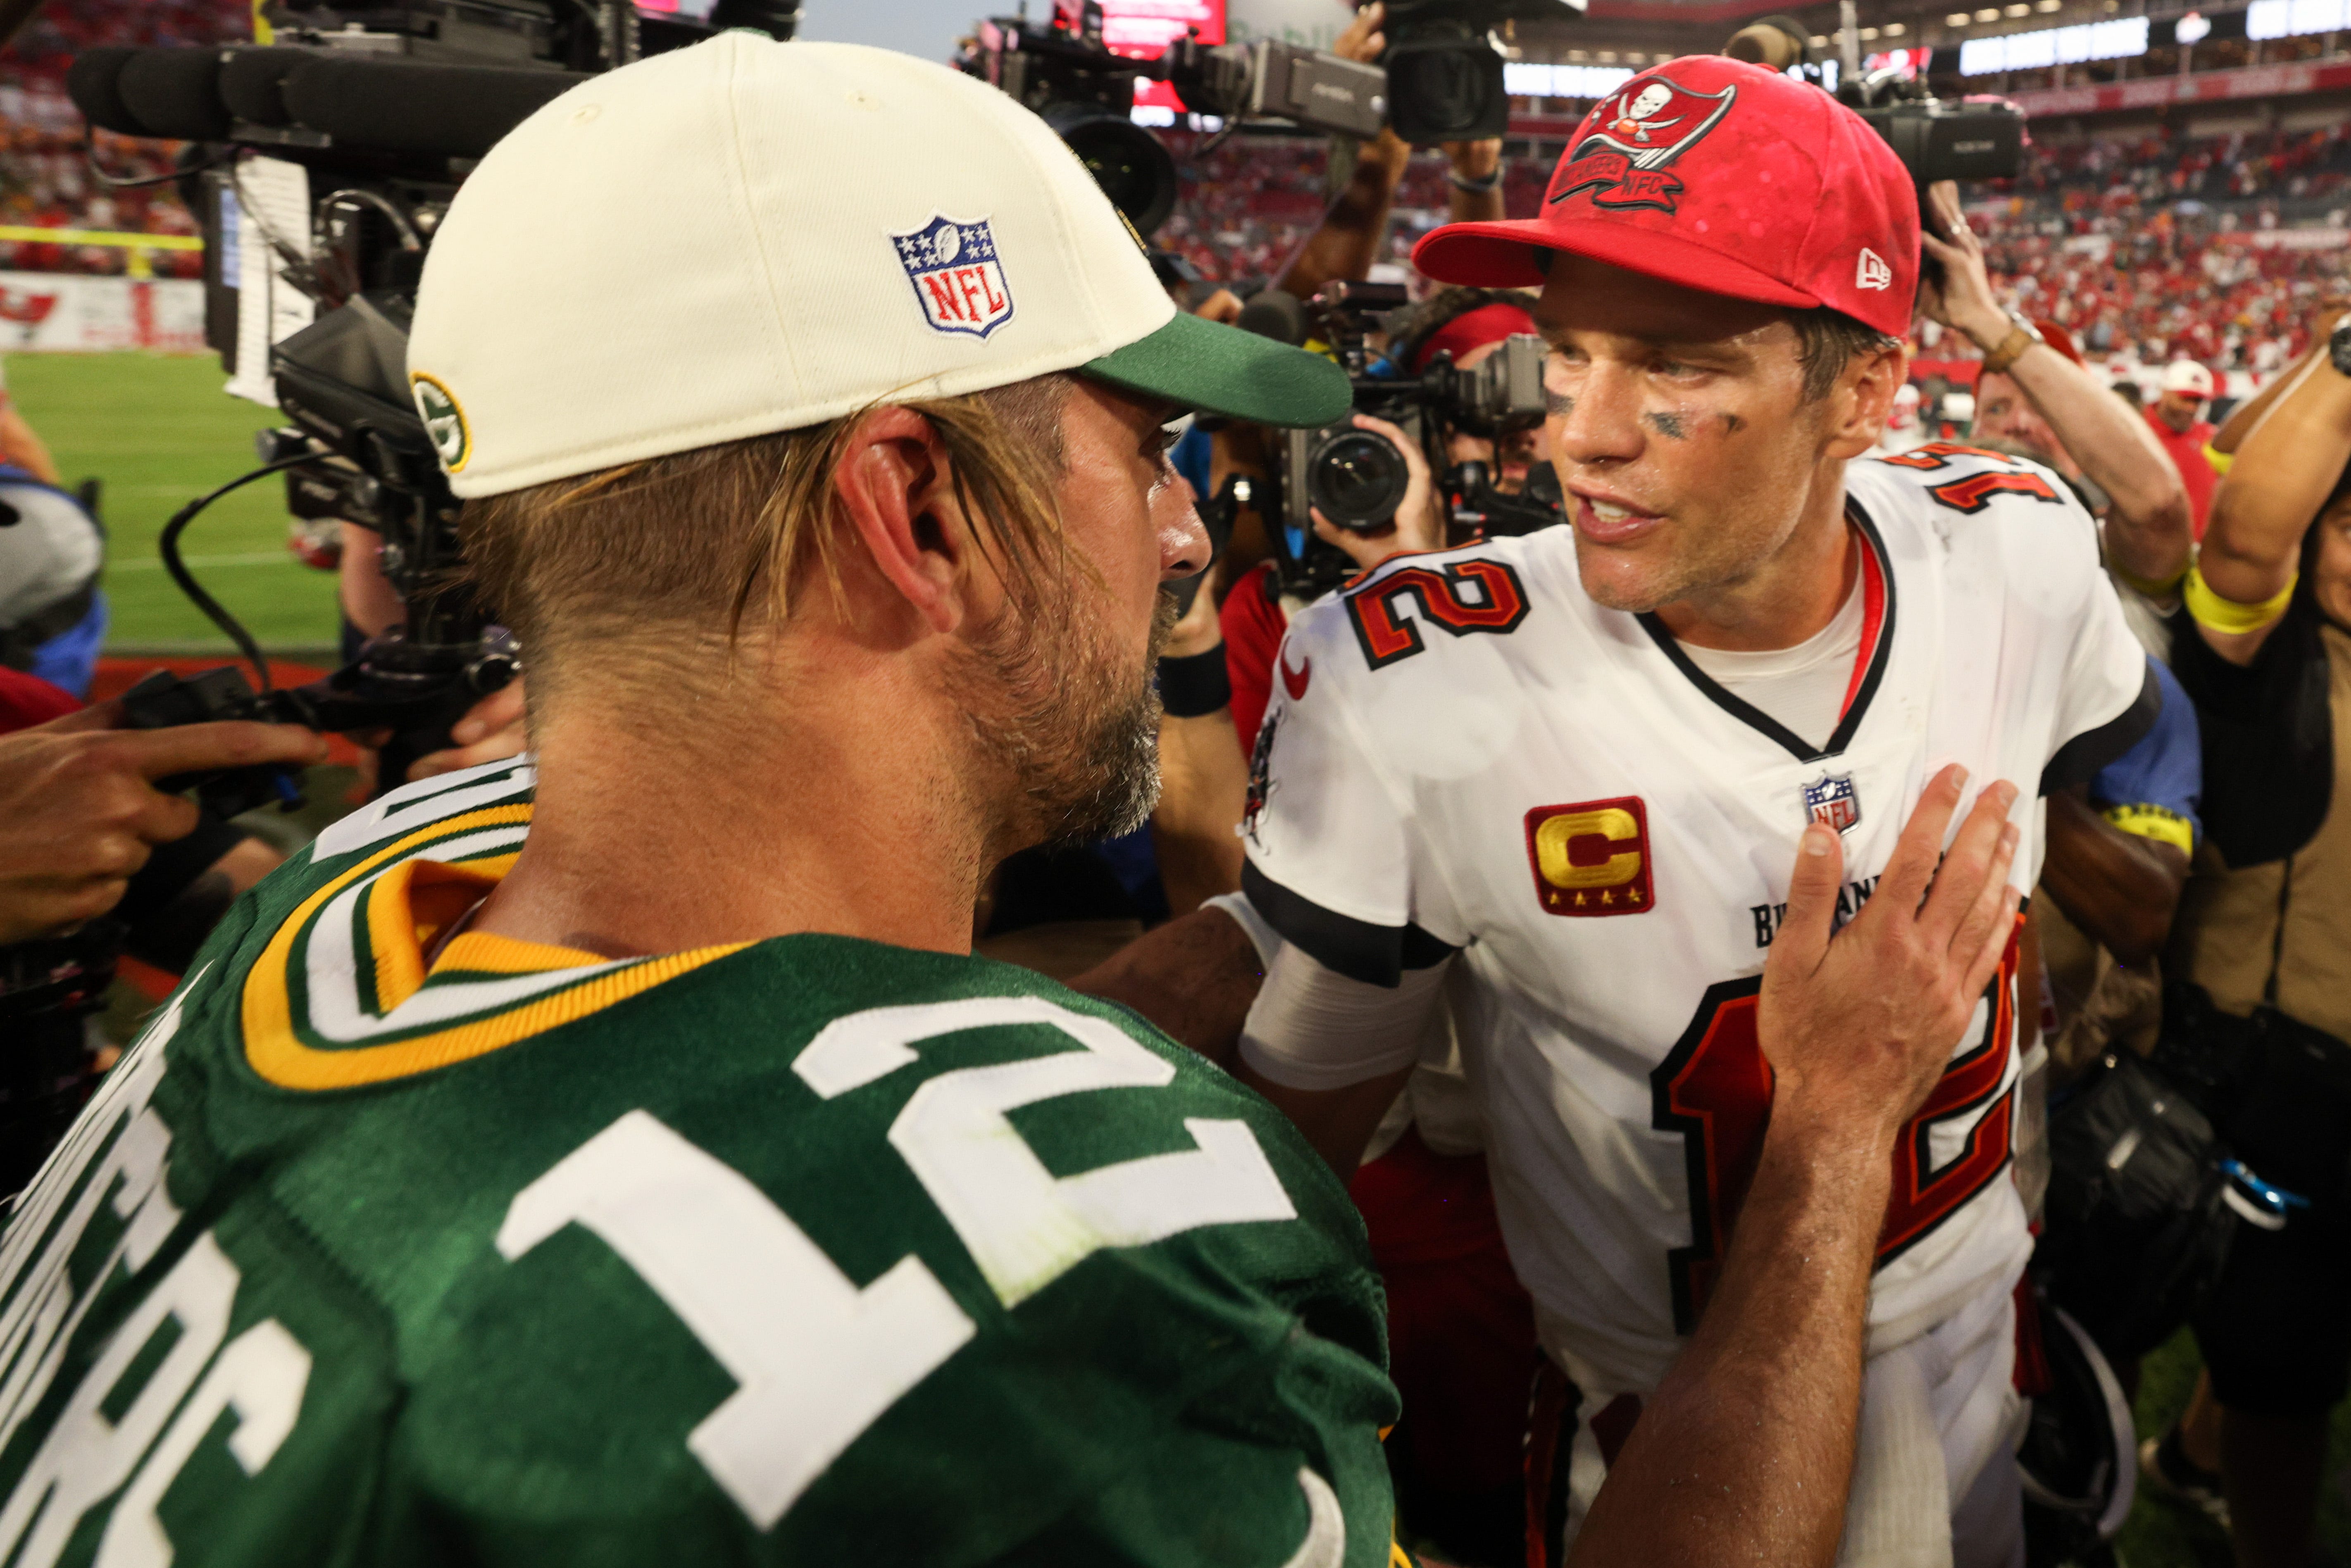 Tampa Bay Buccaneers quarterback Tom Brady and Green Bay Packers quarterback Aaron Rodgers greet each other after the Packers defeated the Buccaneers, 14-12, on Sept. 25, 2022, at Raymond James Stadium.